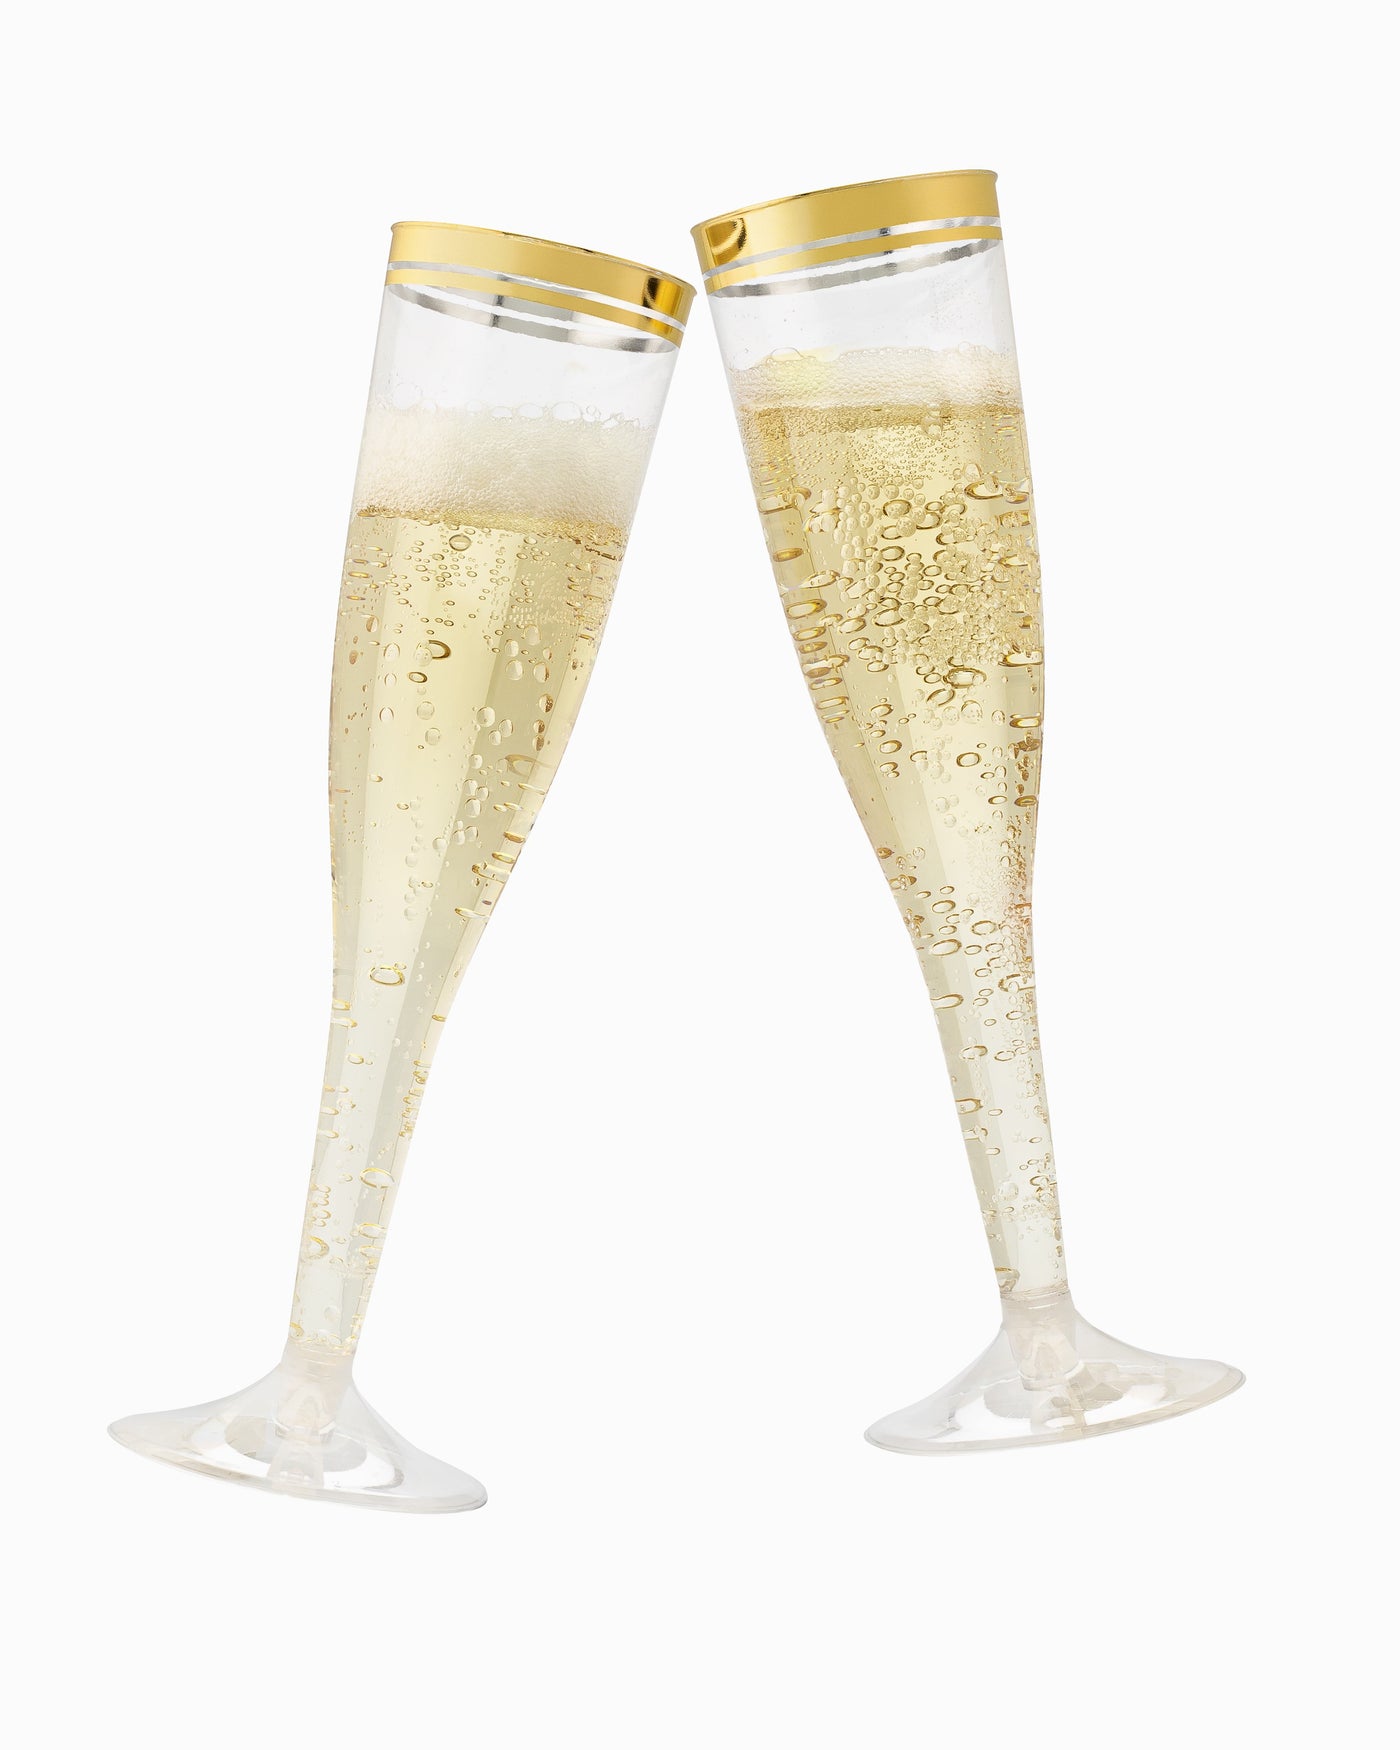 Perfect Settings 36 Pack Plastic Champagne Flutes with Gold Rim | Disposable and Elegant Clear Glasses for Parties, Weddings, and Showers - Perfect Settings Tableware